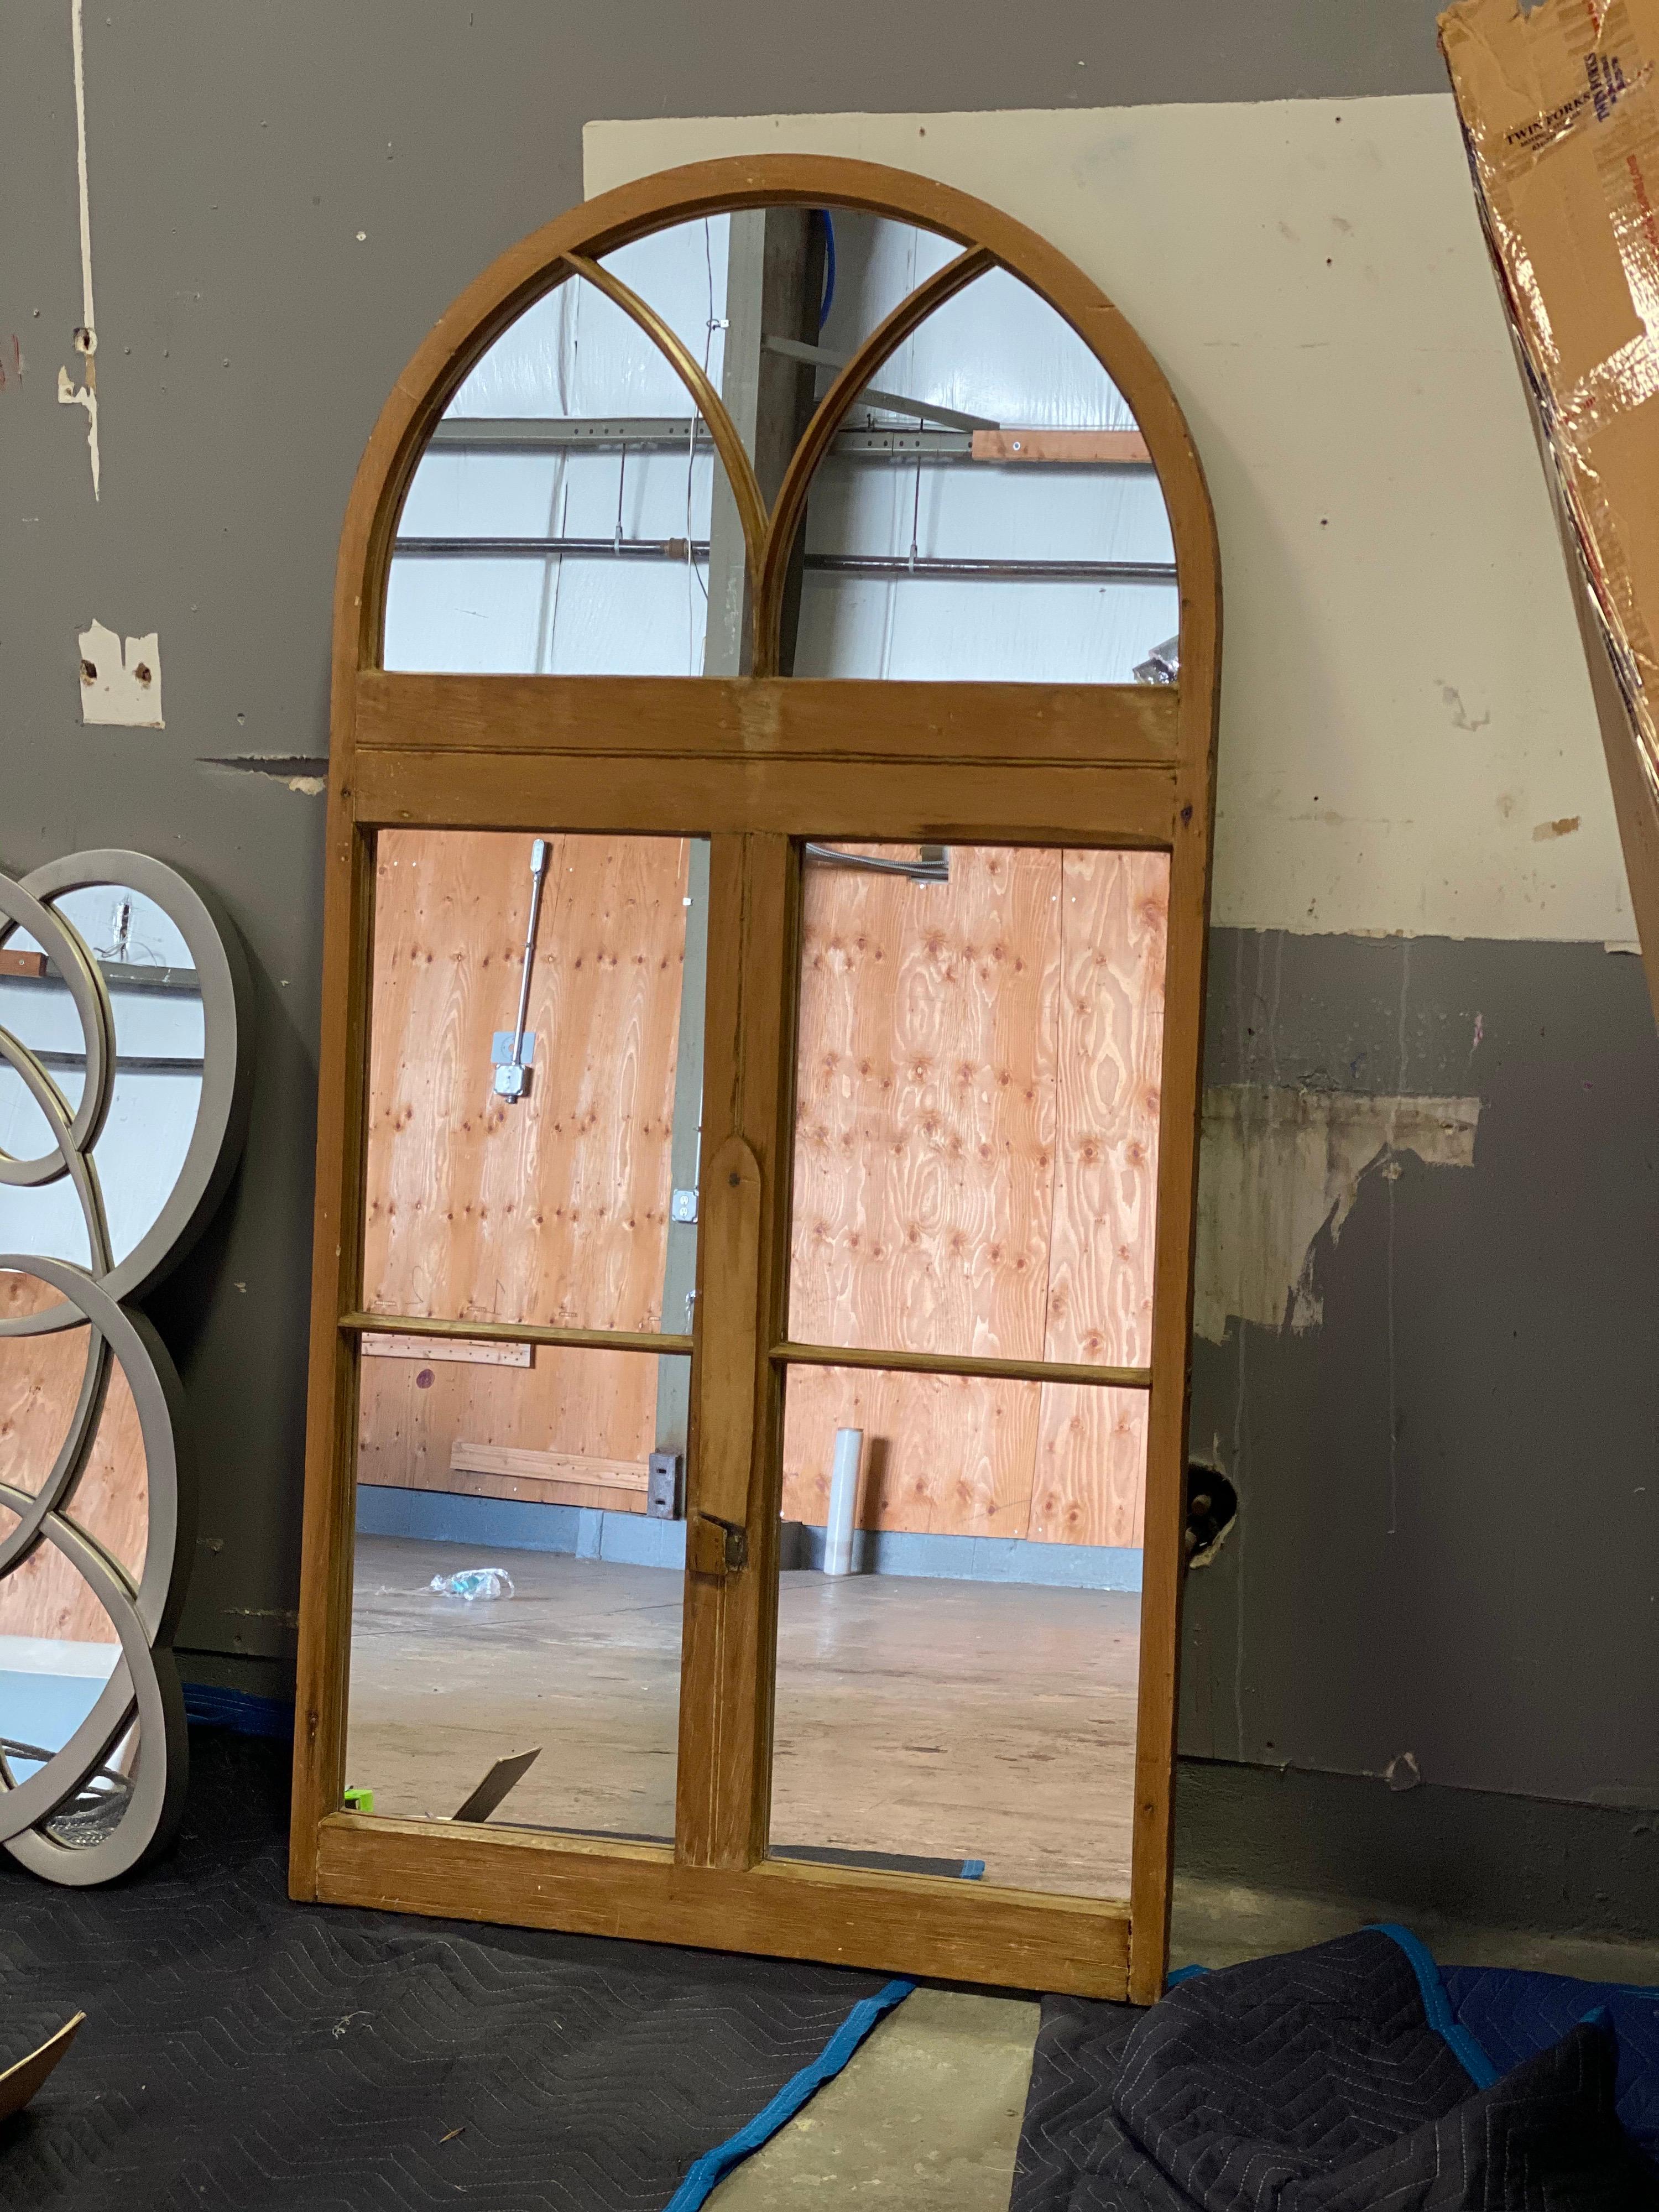 Arched pine architectural full length mirror. Center wood slides open to reveal an open slot.
Measures: 1 3/8